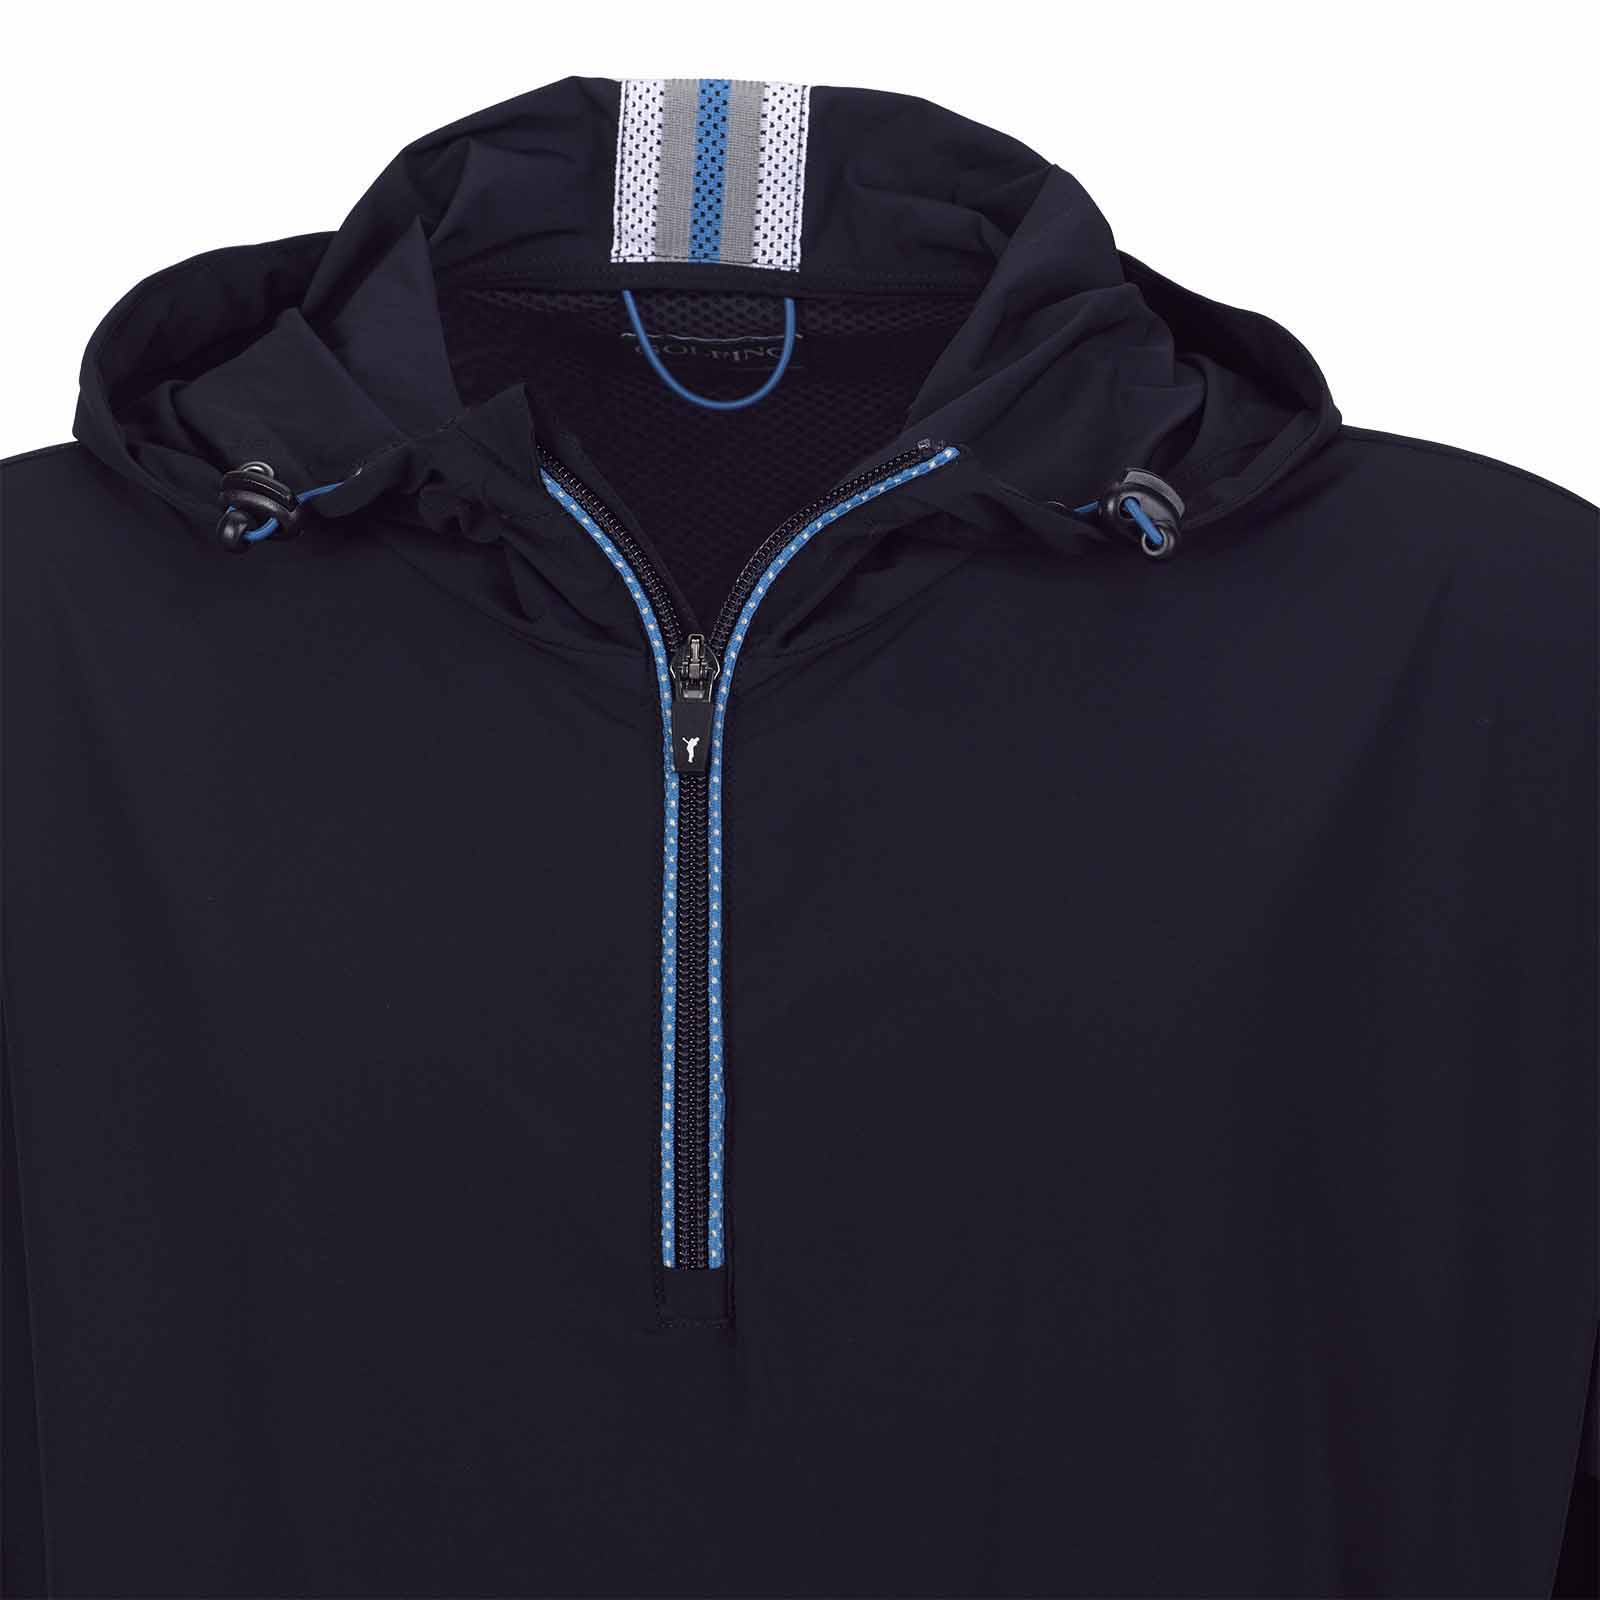 Men's golf jacket with wind protection, a hood and a short zip, in loose fit